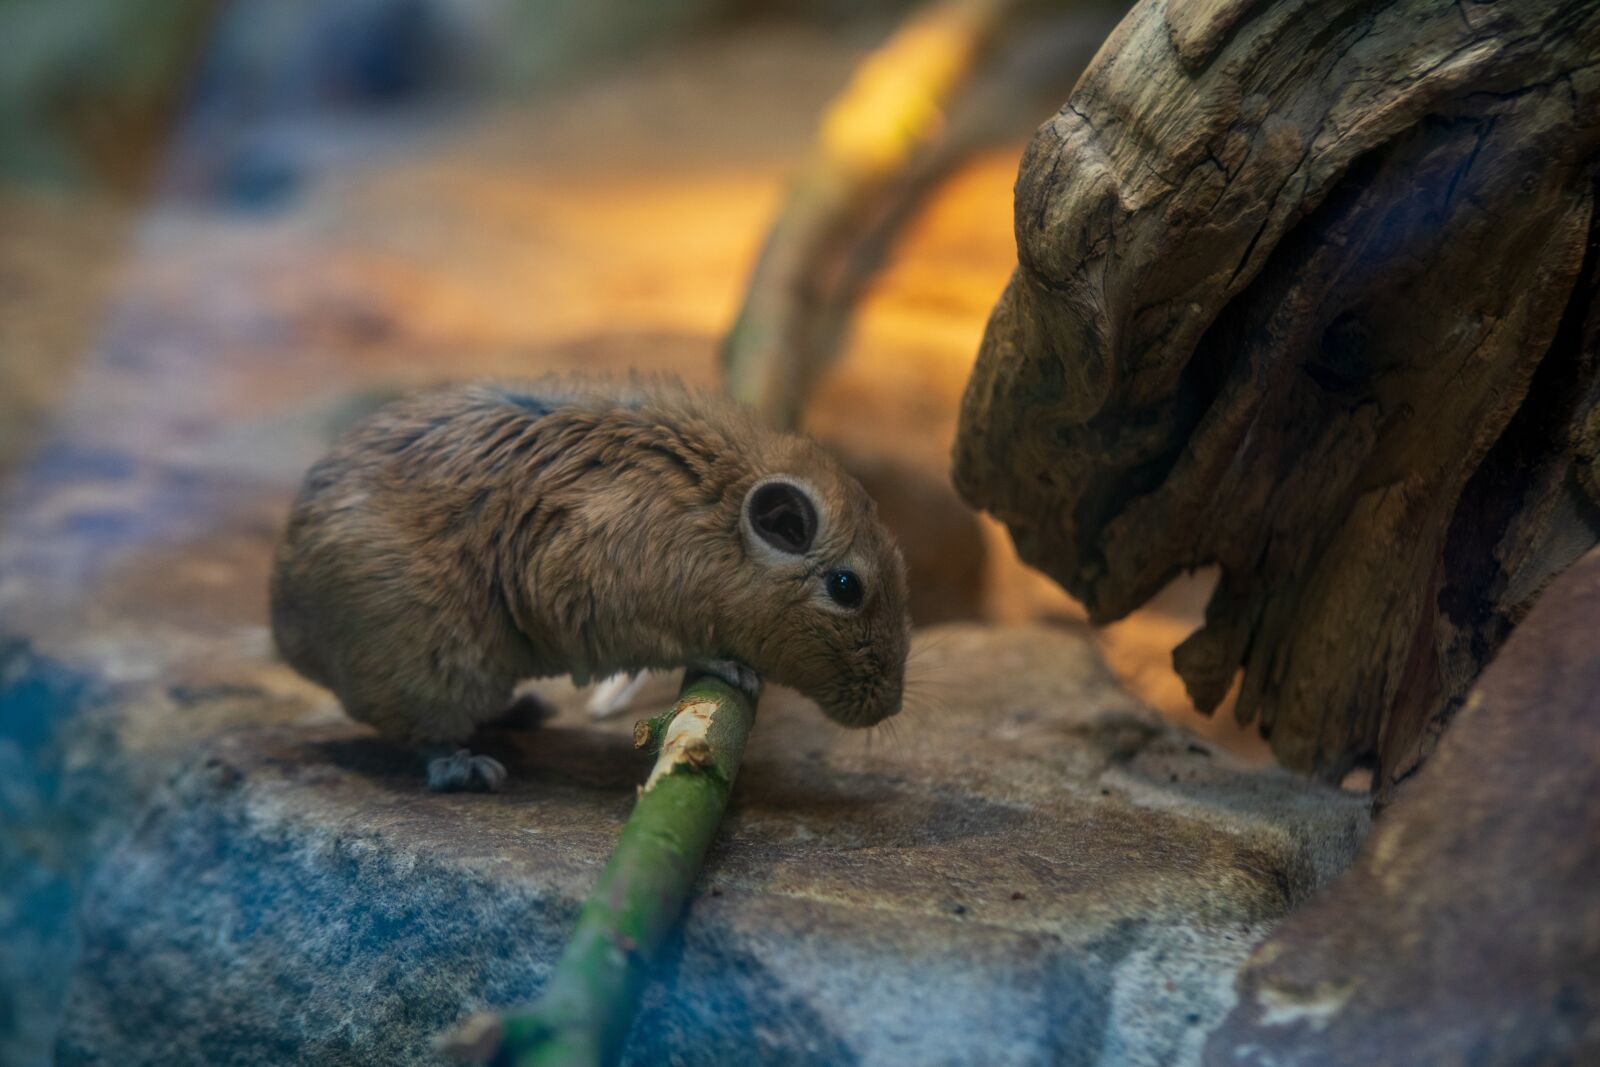 Sony a7 sample photo. Mouse, zoo, nature photography